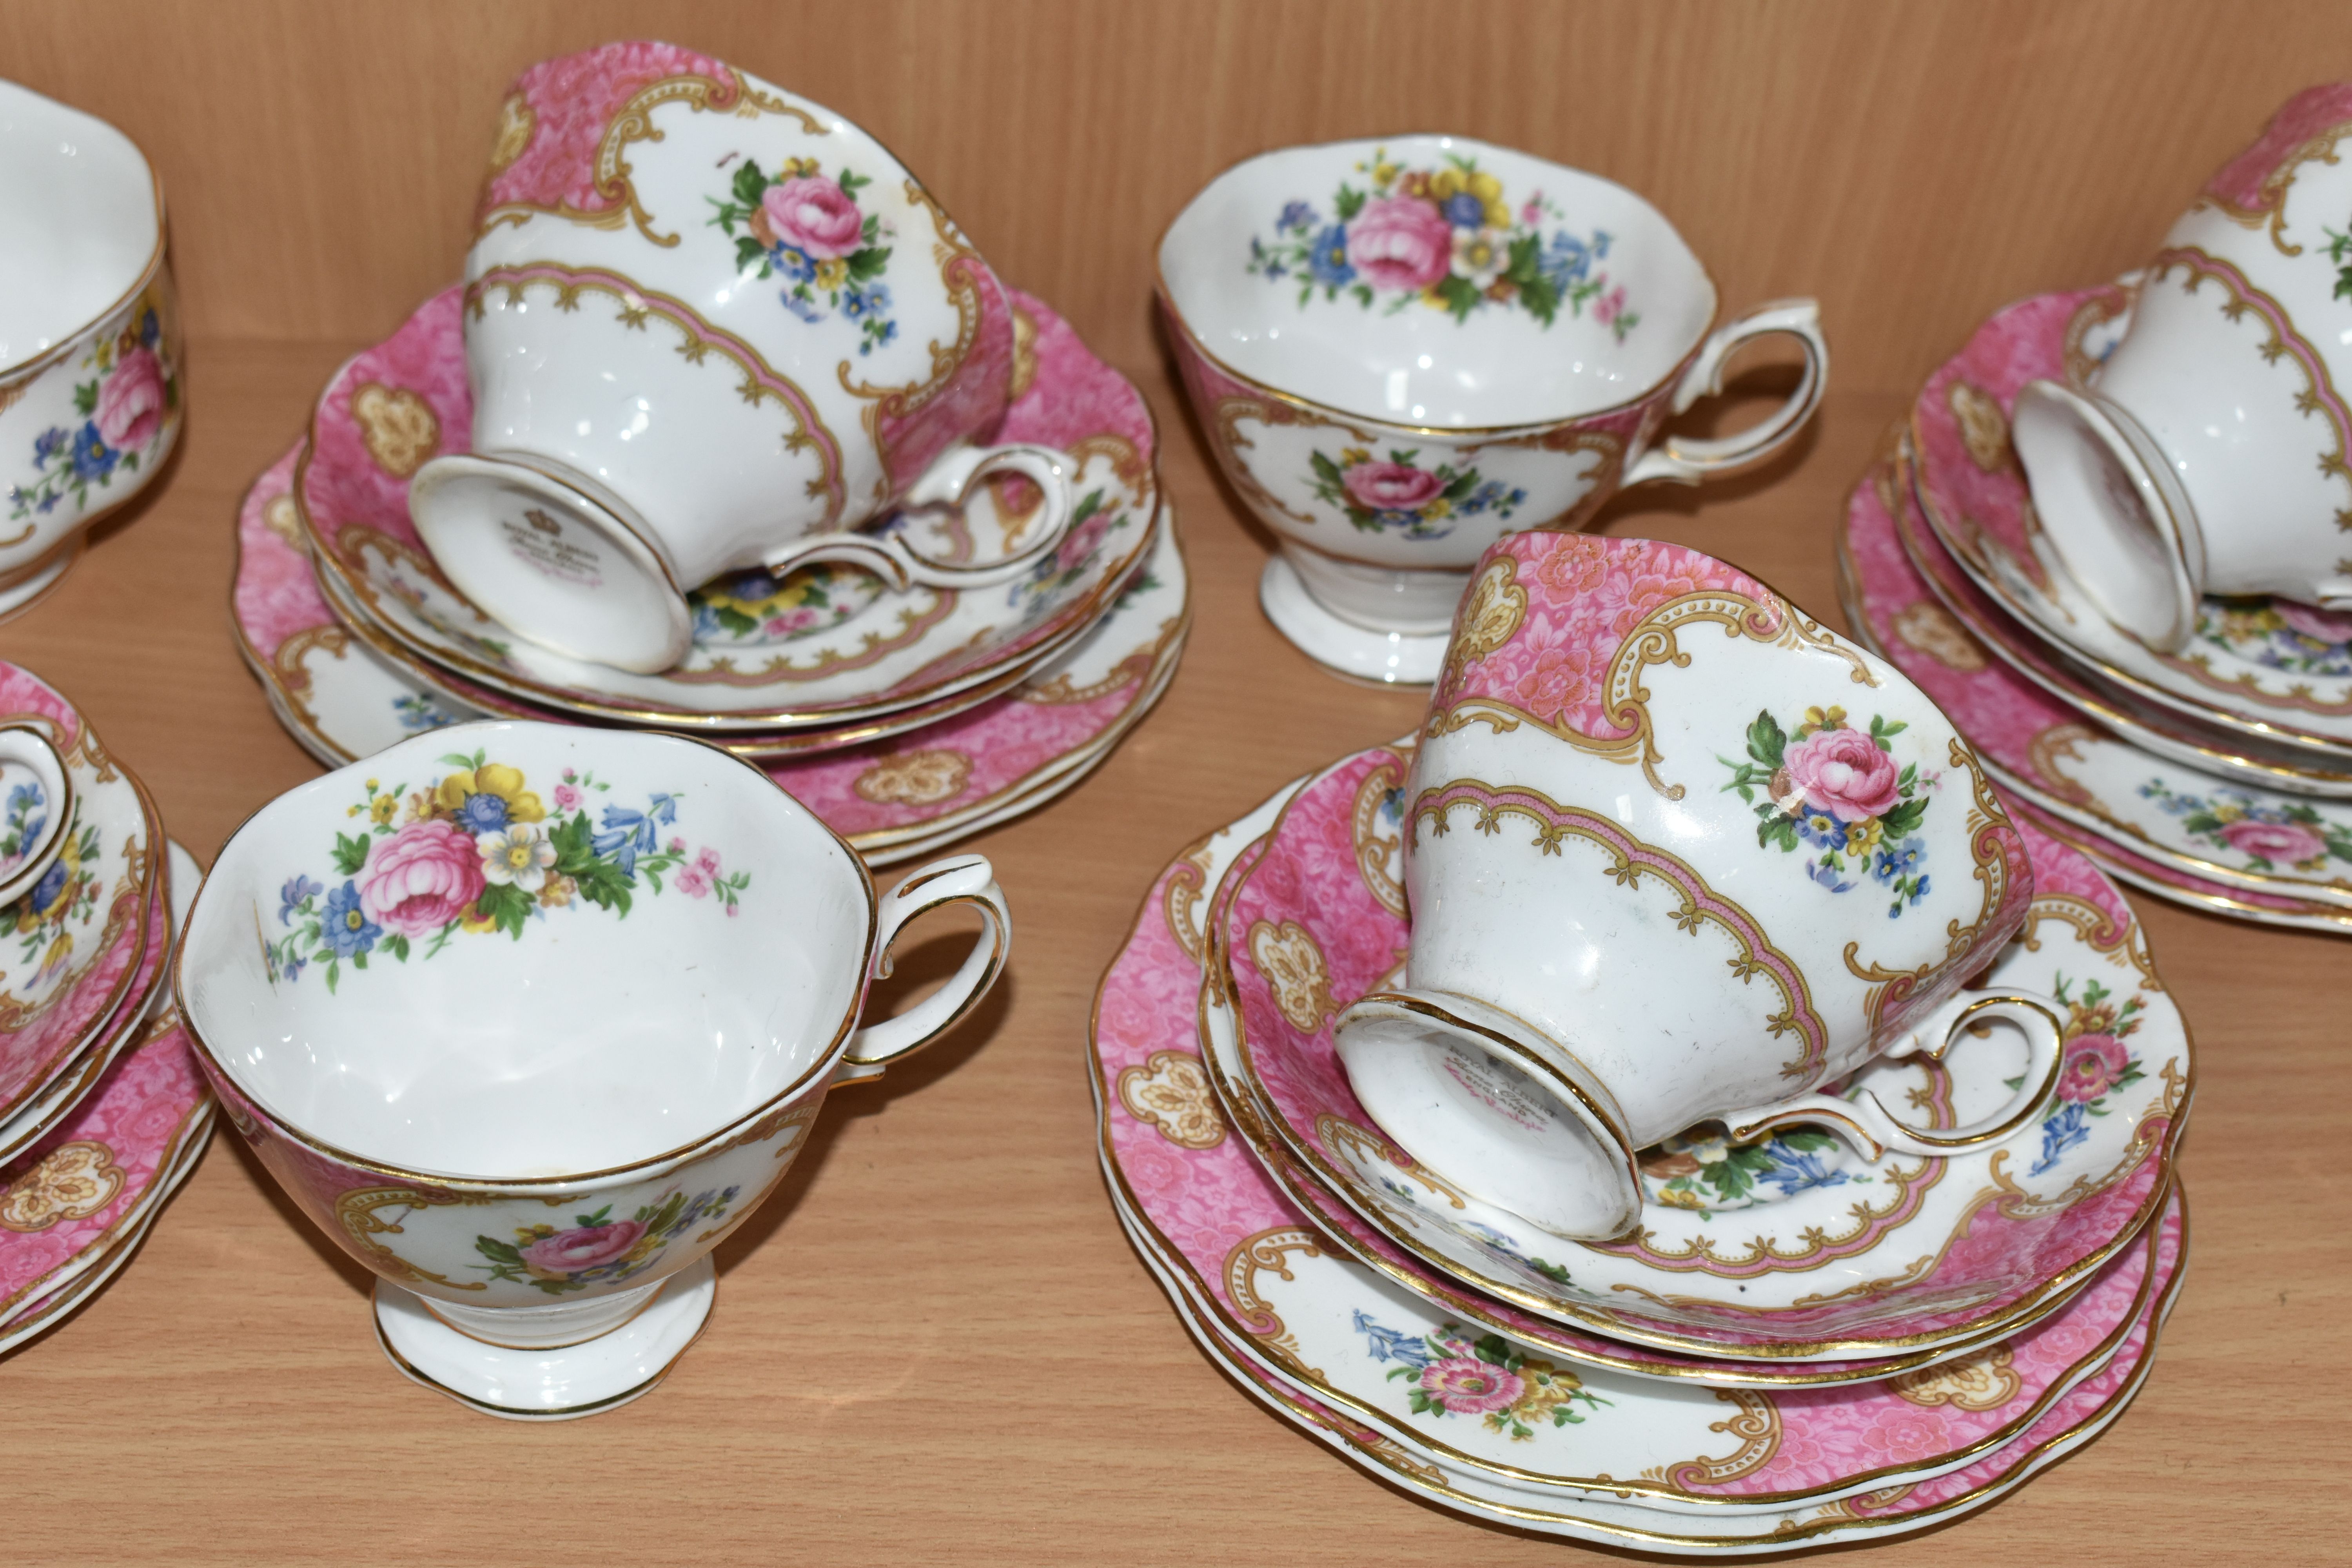 A THIRTY FOUR PIECE ROYAL ALBERT 'LADY CARLYLE' TEA SET, comprising two cake plates, a cream jug, - Image 3 of 7